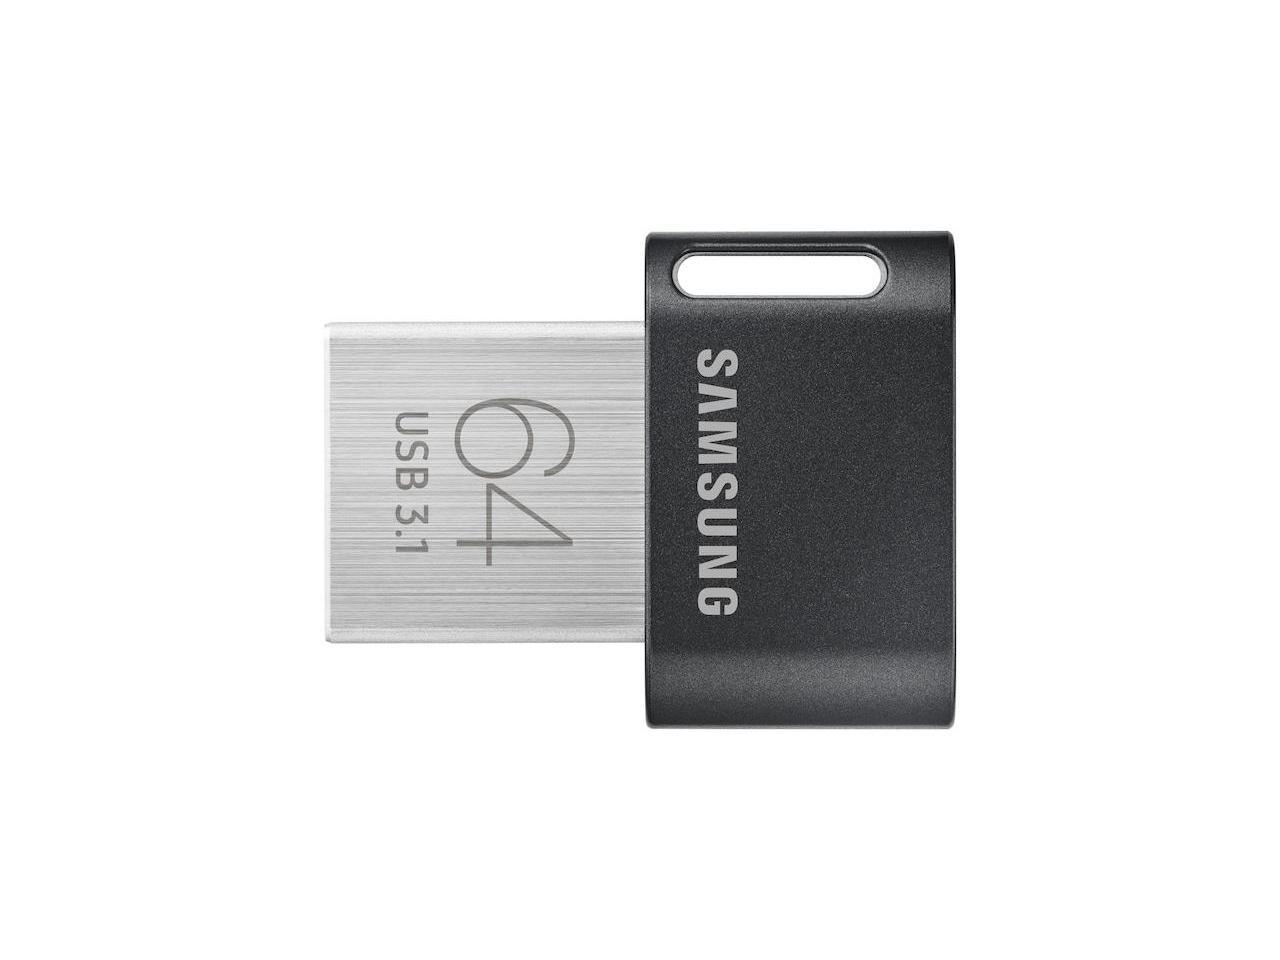 Committee Uncle or Mister carton Samsung Fit Plus 64 GB USB 3.1 Gen 1 200MB/s USB Flash Drive - Newegg.com